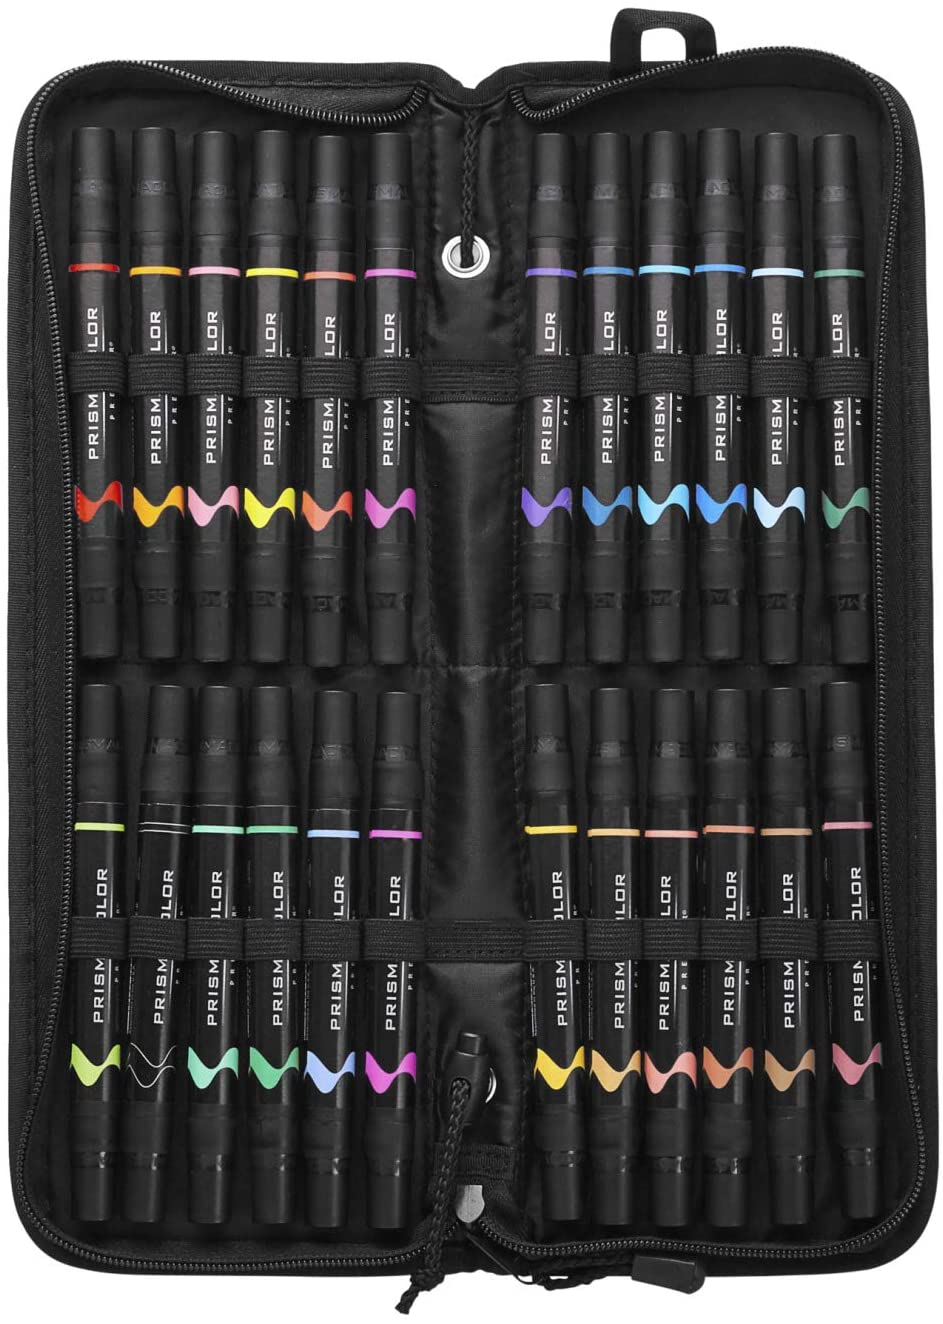 Prismacolor Premier Double-Ended Art Markers, Fine and Brush Tip, 24-Count with Carrying Case